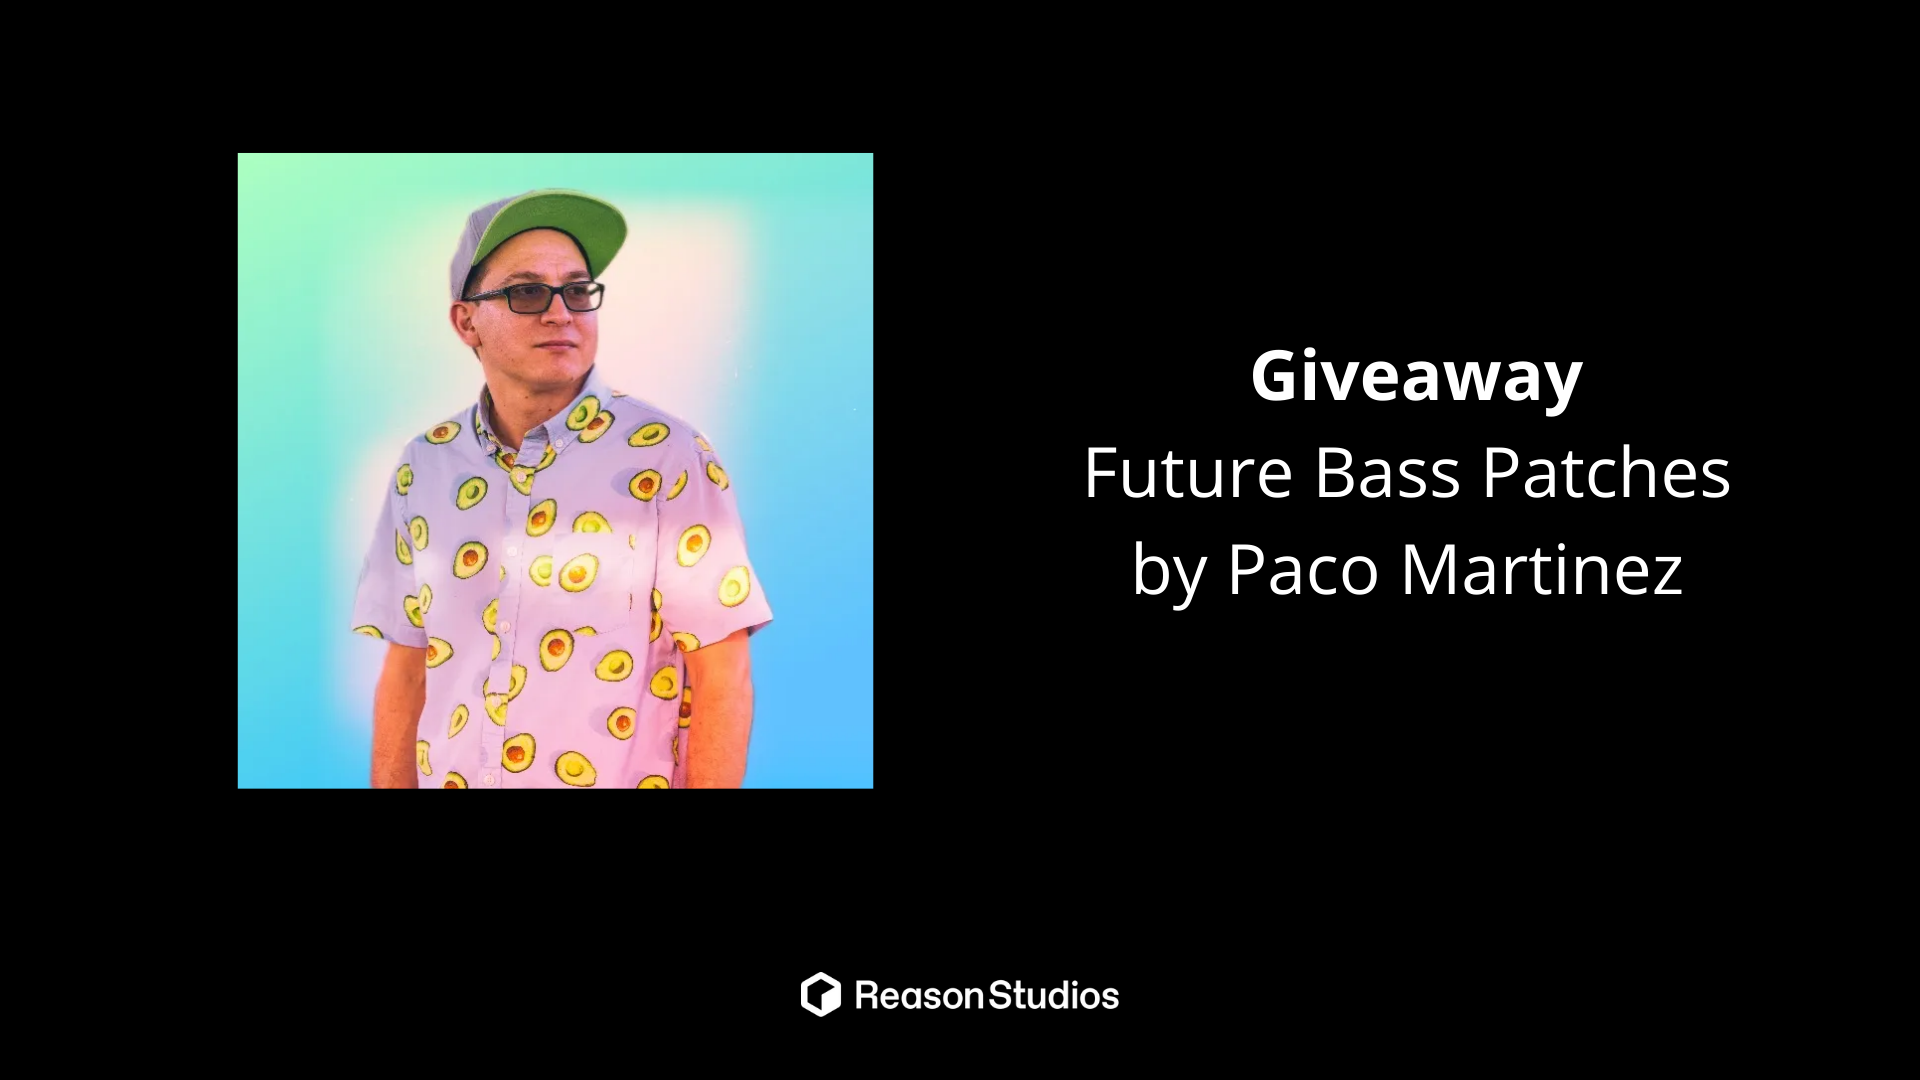 Friday Giveaway – Paco Martinez Future Bass Patches